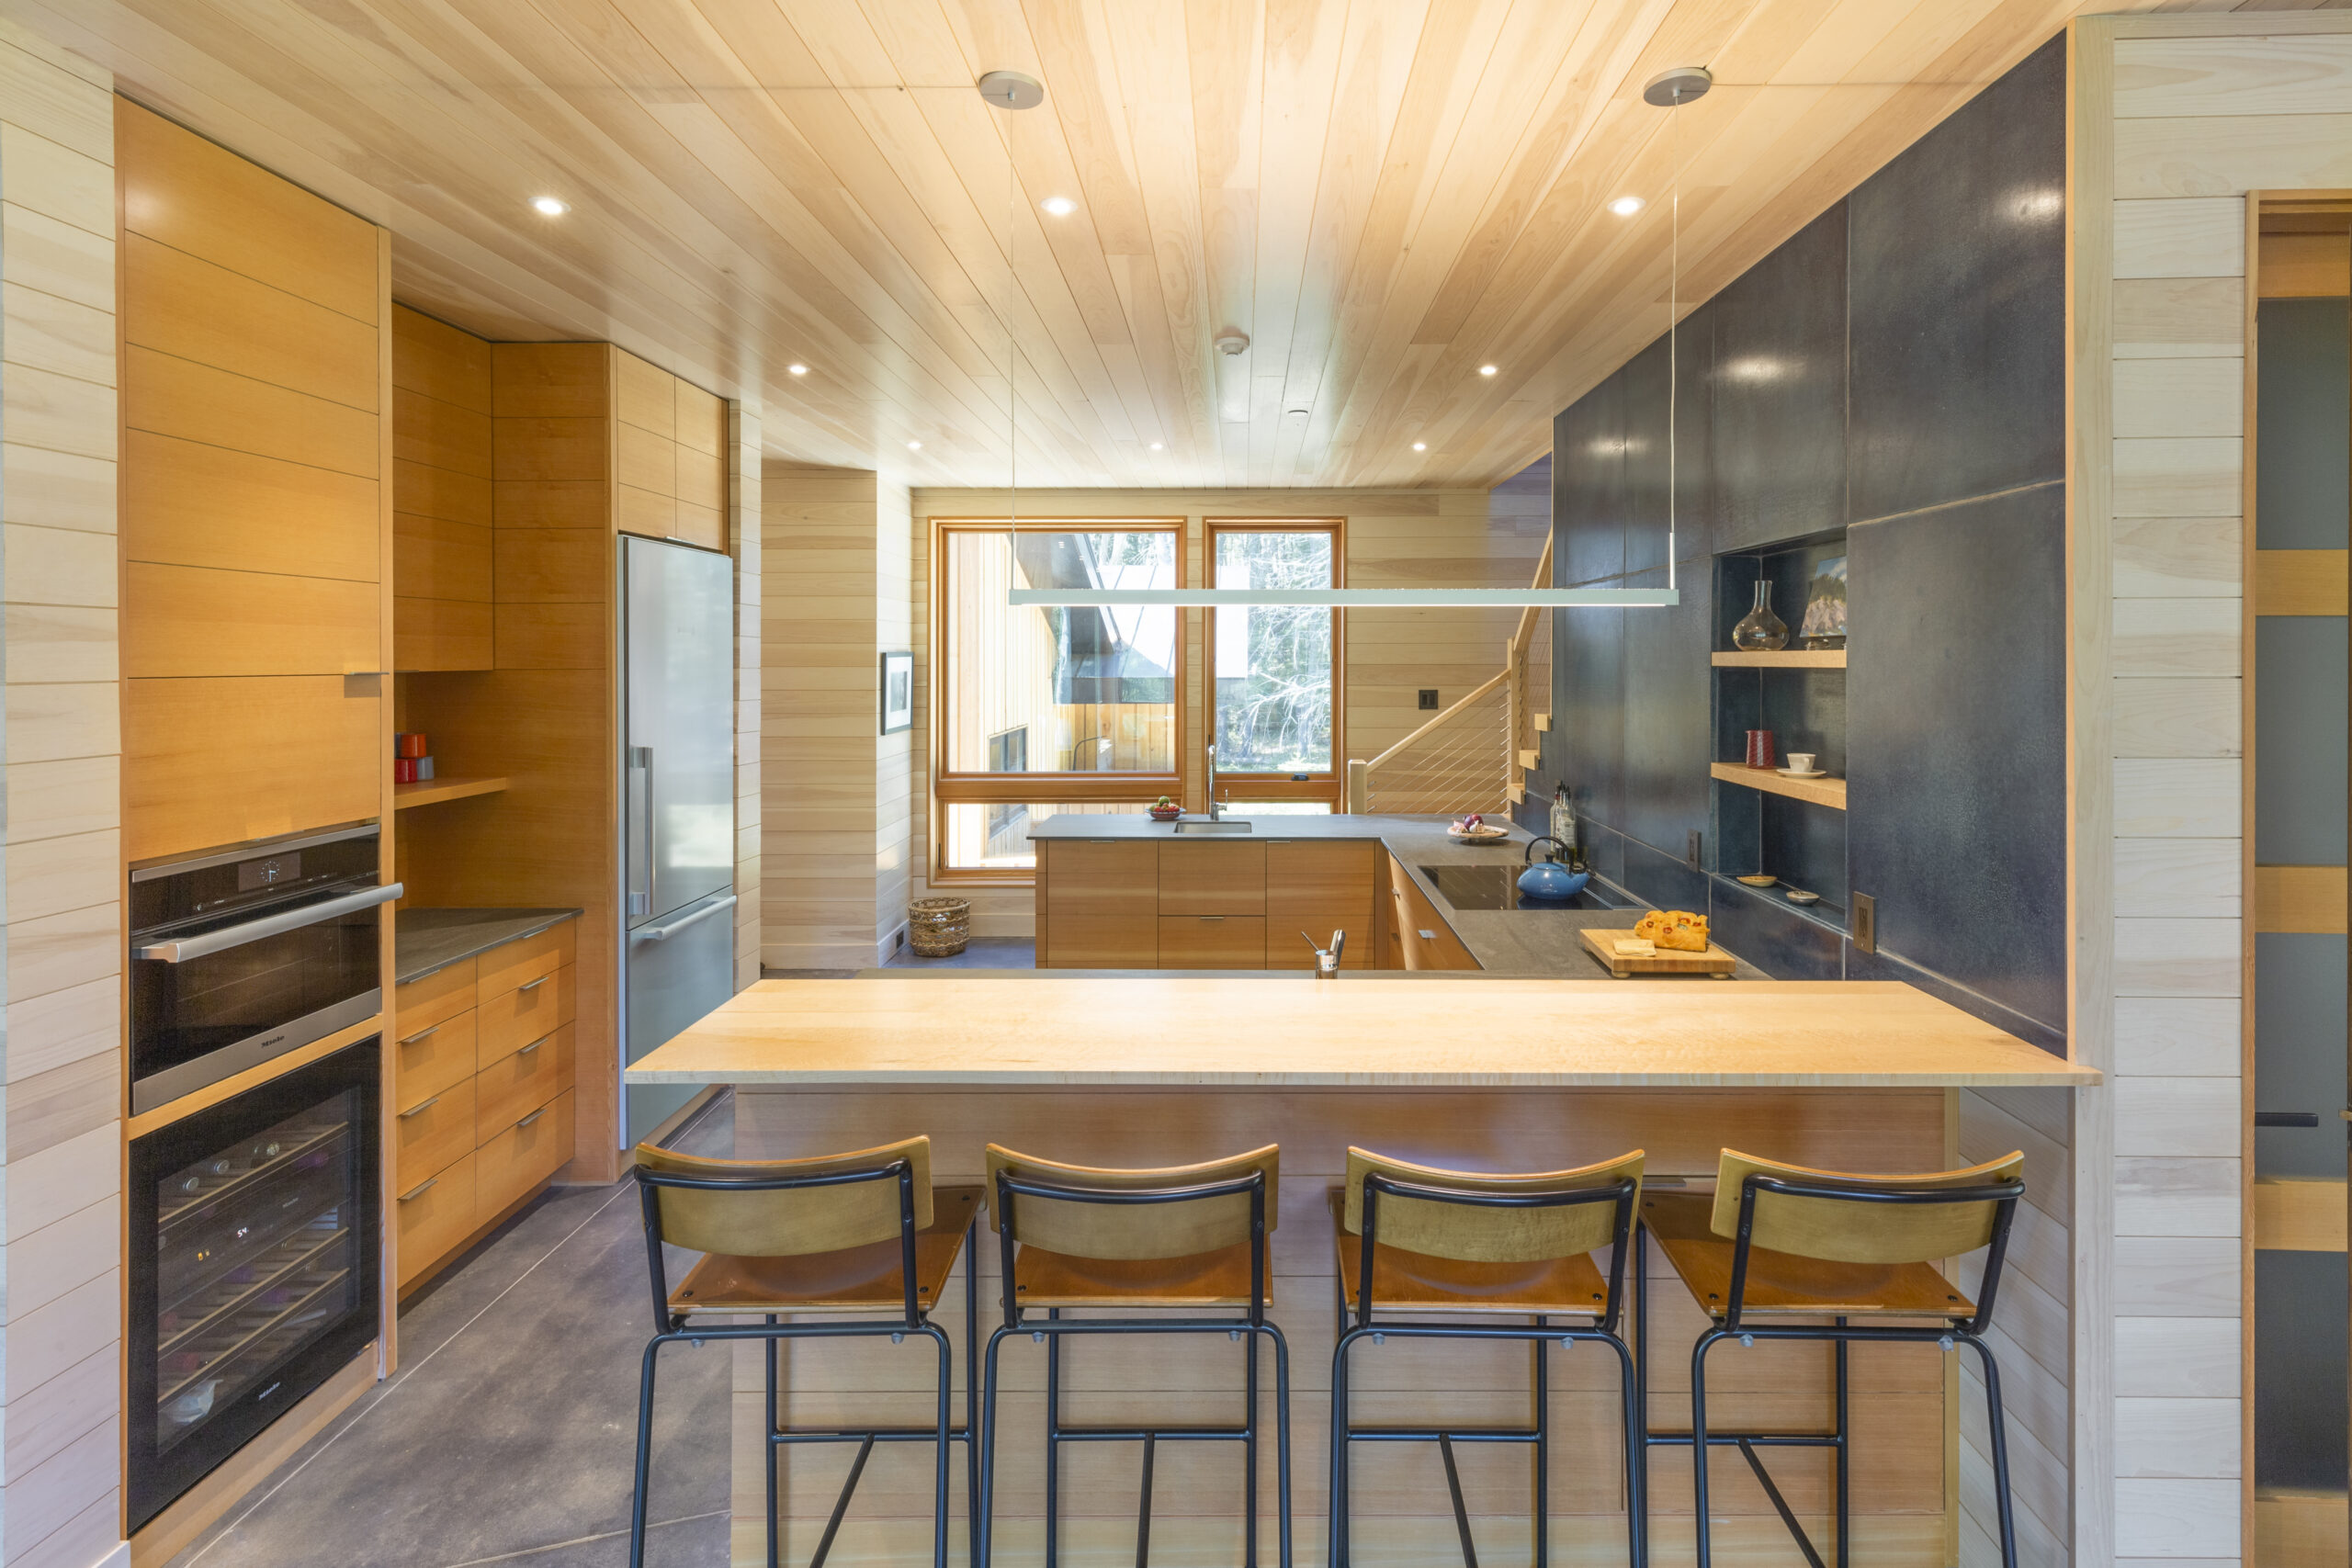 interior view of modern small home-kitchen with dining counter and barstools; striking natural wood ceiling and plenty of built-in storage - photo